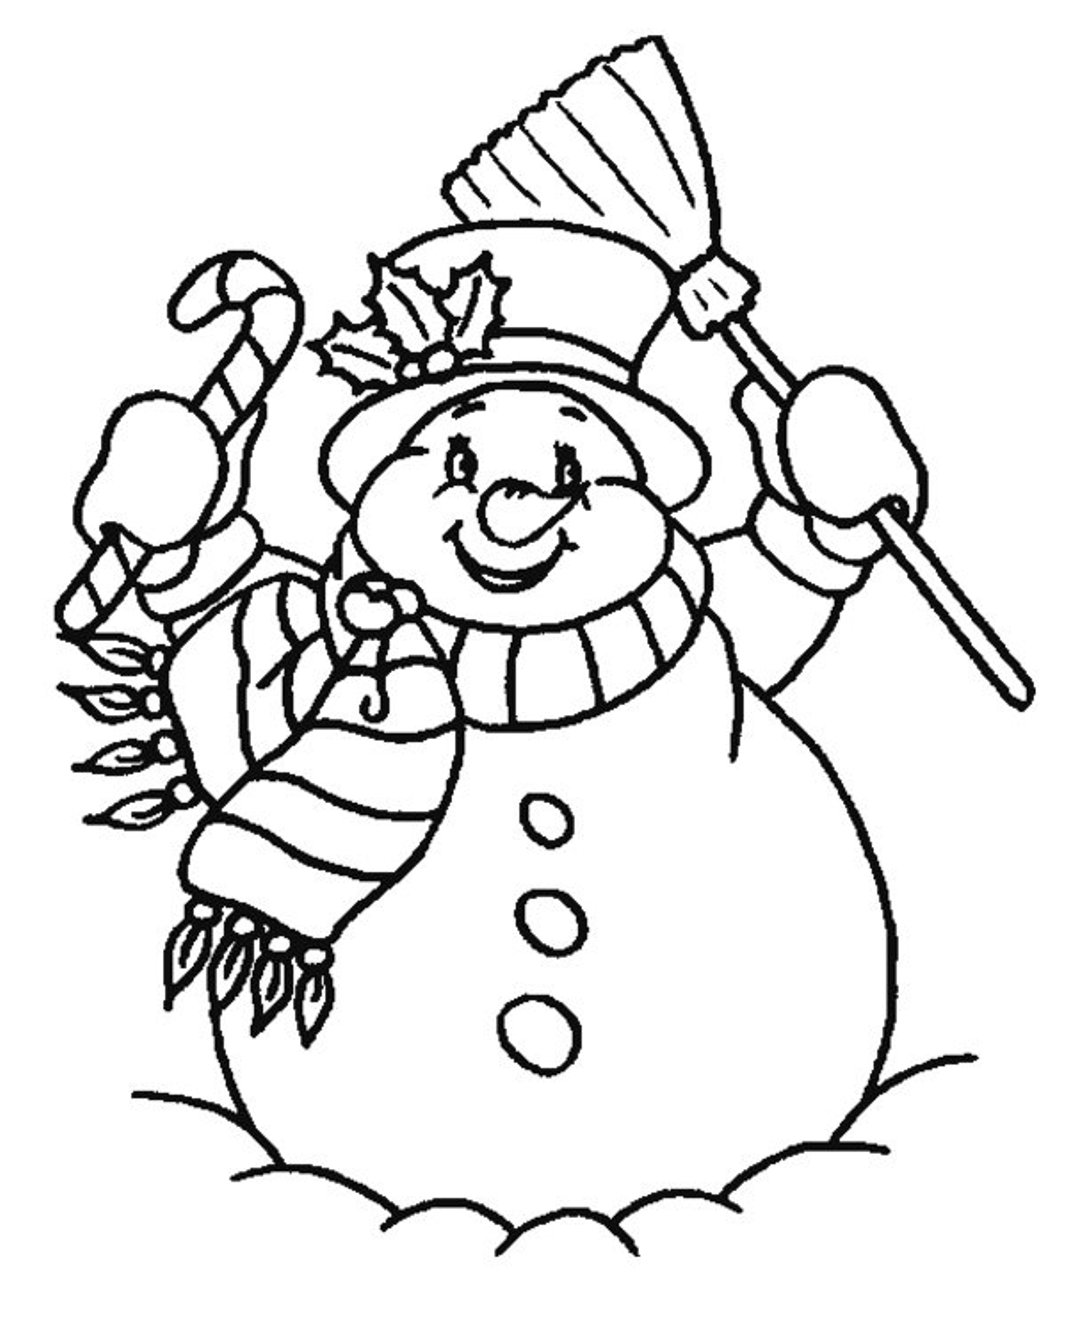 Free Snowman For Kids Coloring Page